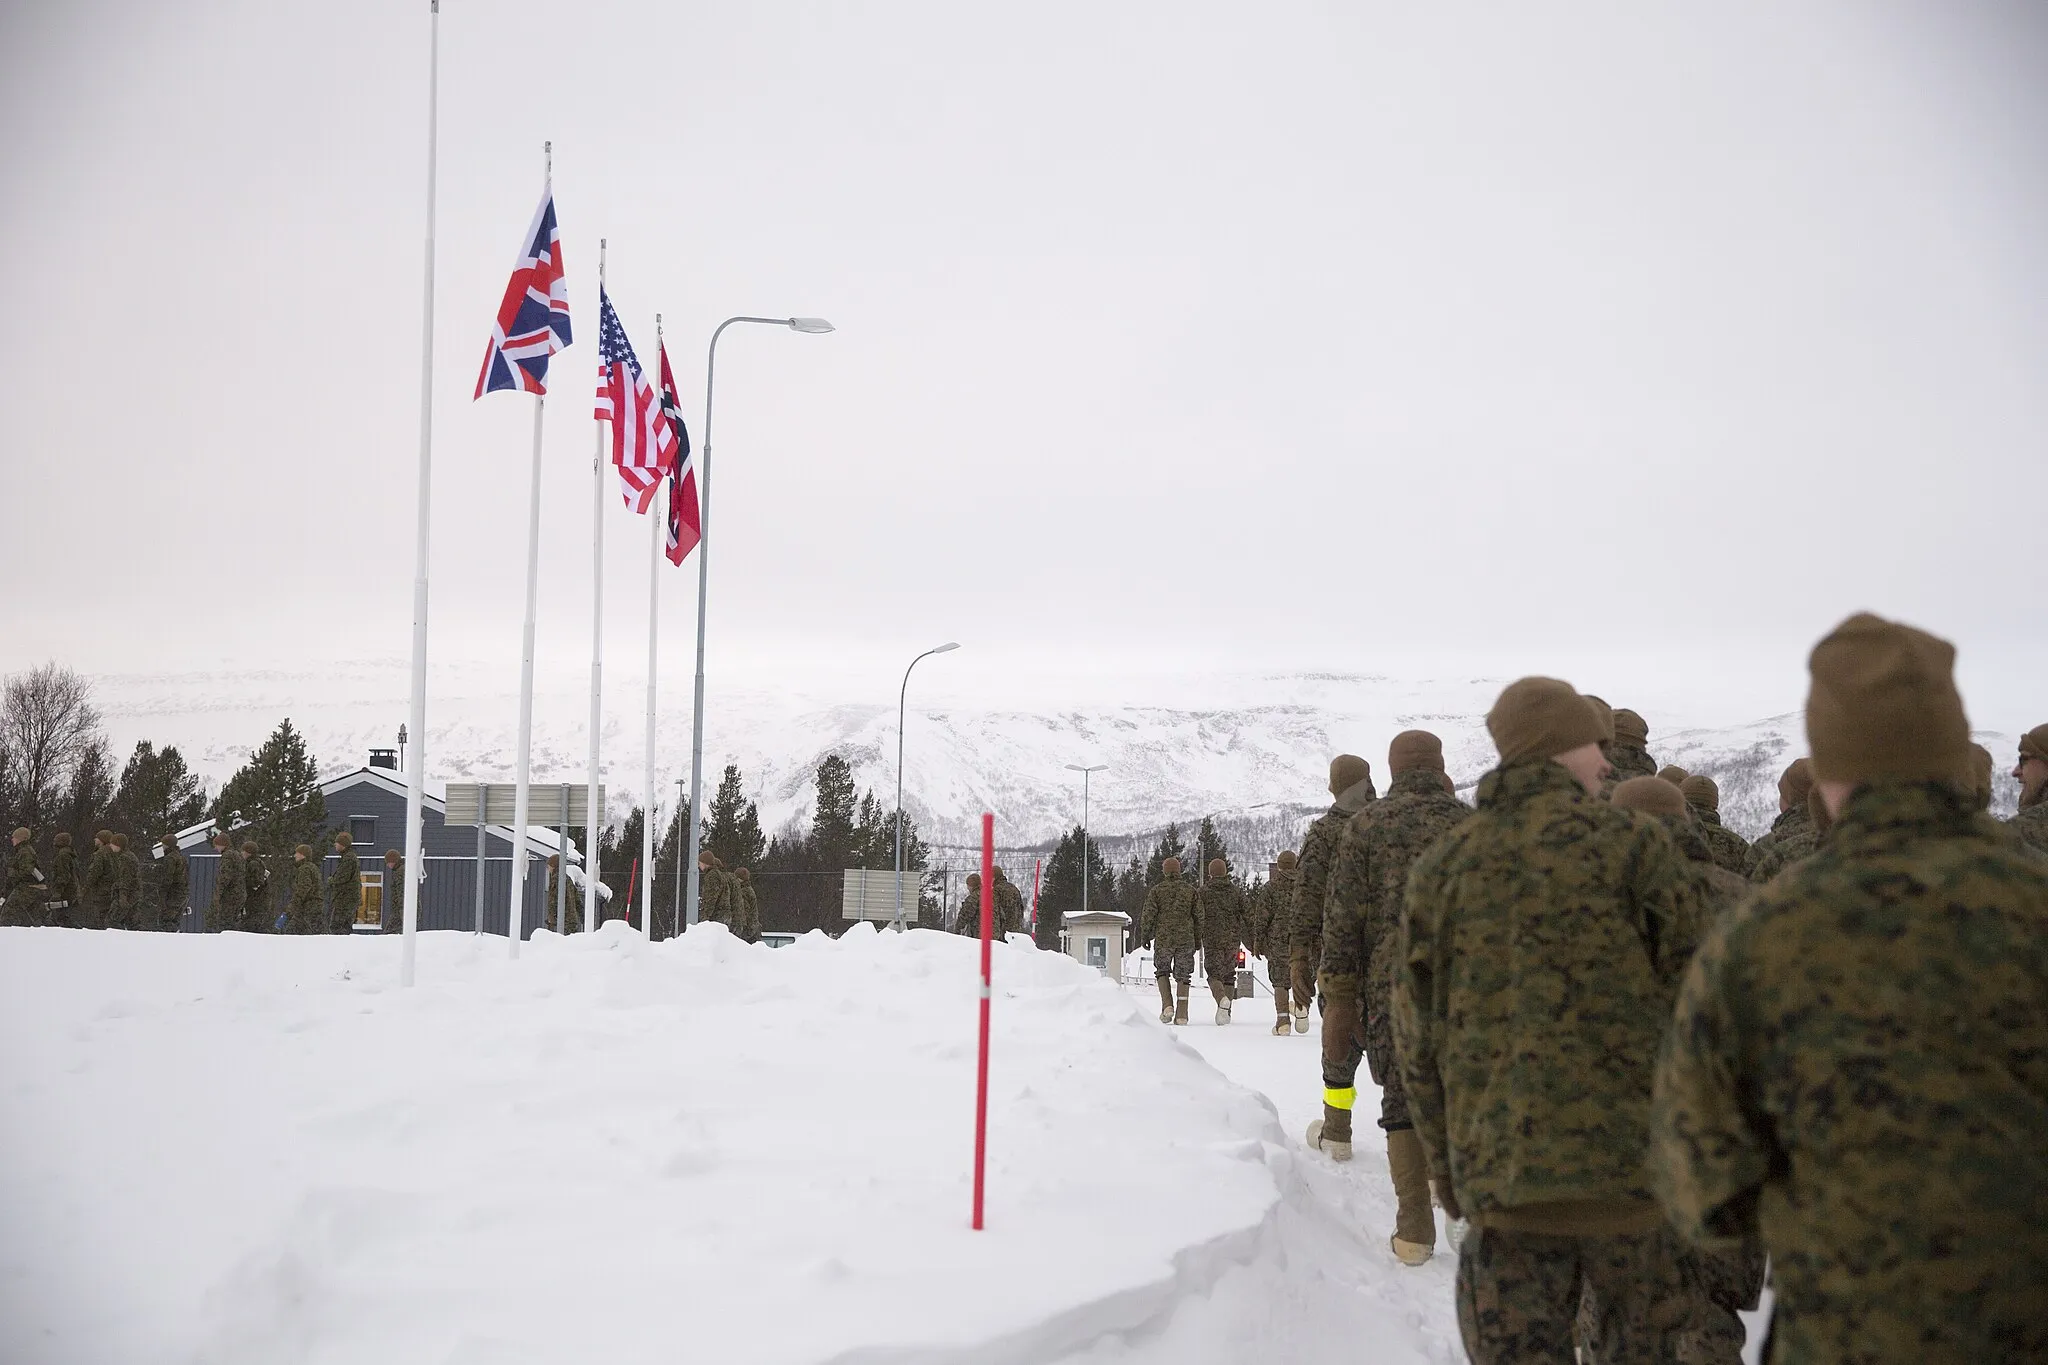 Photo showing: Marines with Black Sea Rotational Force receive an on-base tour during cold-weather training aboard Porsangmoen, Norway, Jan. 30, 2016. The Arctic training was hosted by the Norwegian military and conducted by U.K. Royal Commandos to improve the U.S. Marine Corps’ capability to respond and operate in different environments. (U.S. Marine Corps photo by Cpl. Immanuel Johnson/Released)
Unit: U.S. Marine Corps Forces Europe and Africa